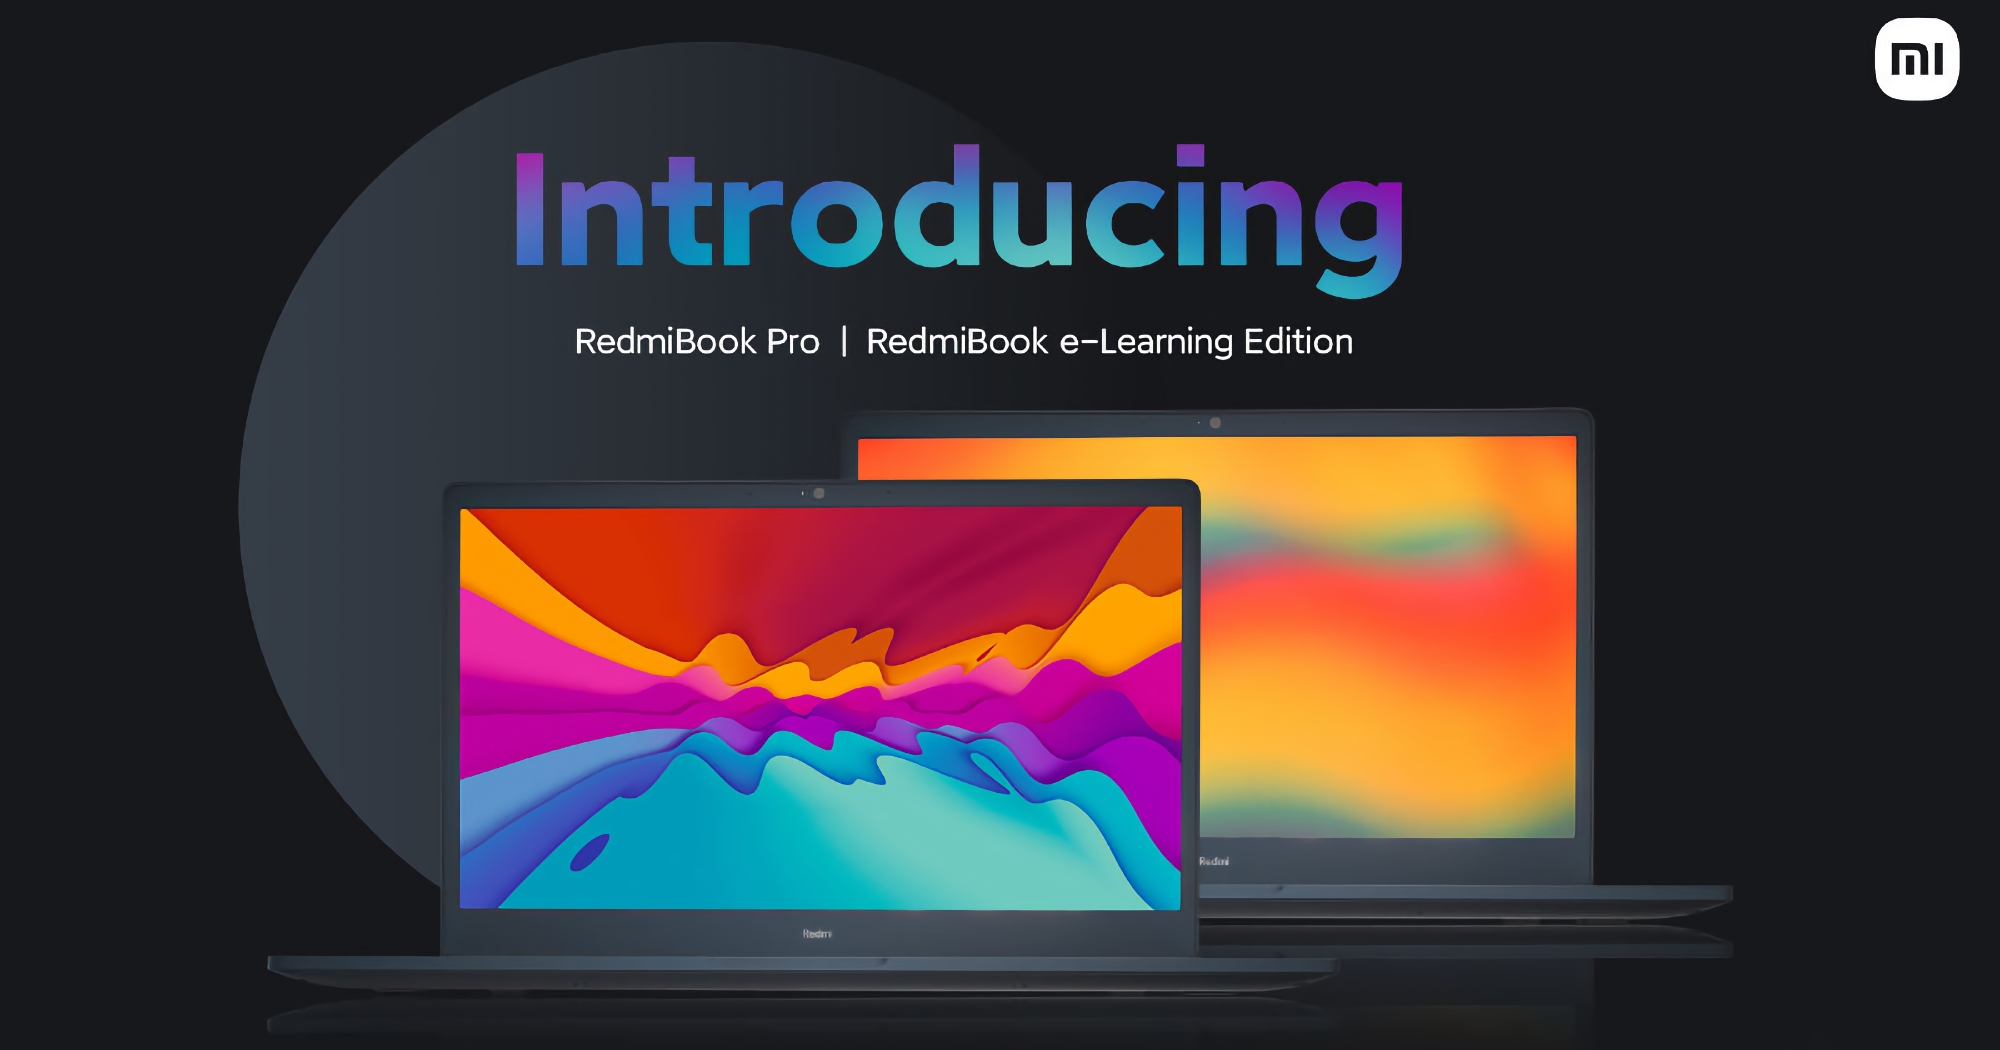 Xiaomi unveils RedmiBook Pro and RedmiBook E-Learning: laptops with 15.6" screens, 11th generation Intel Core chips and price $531